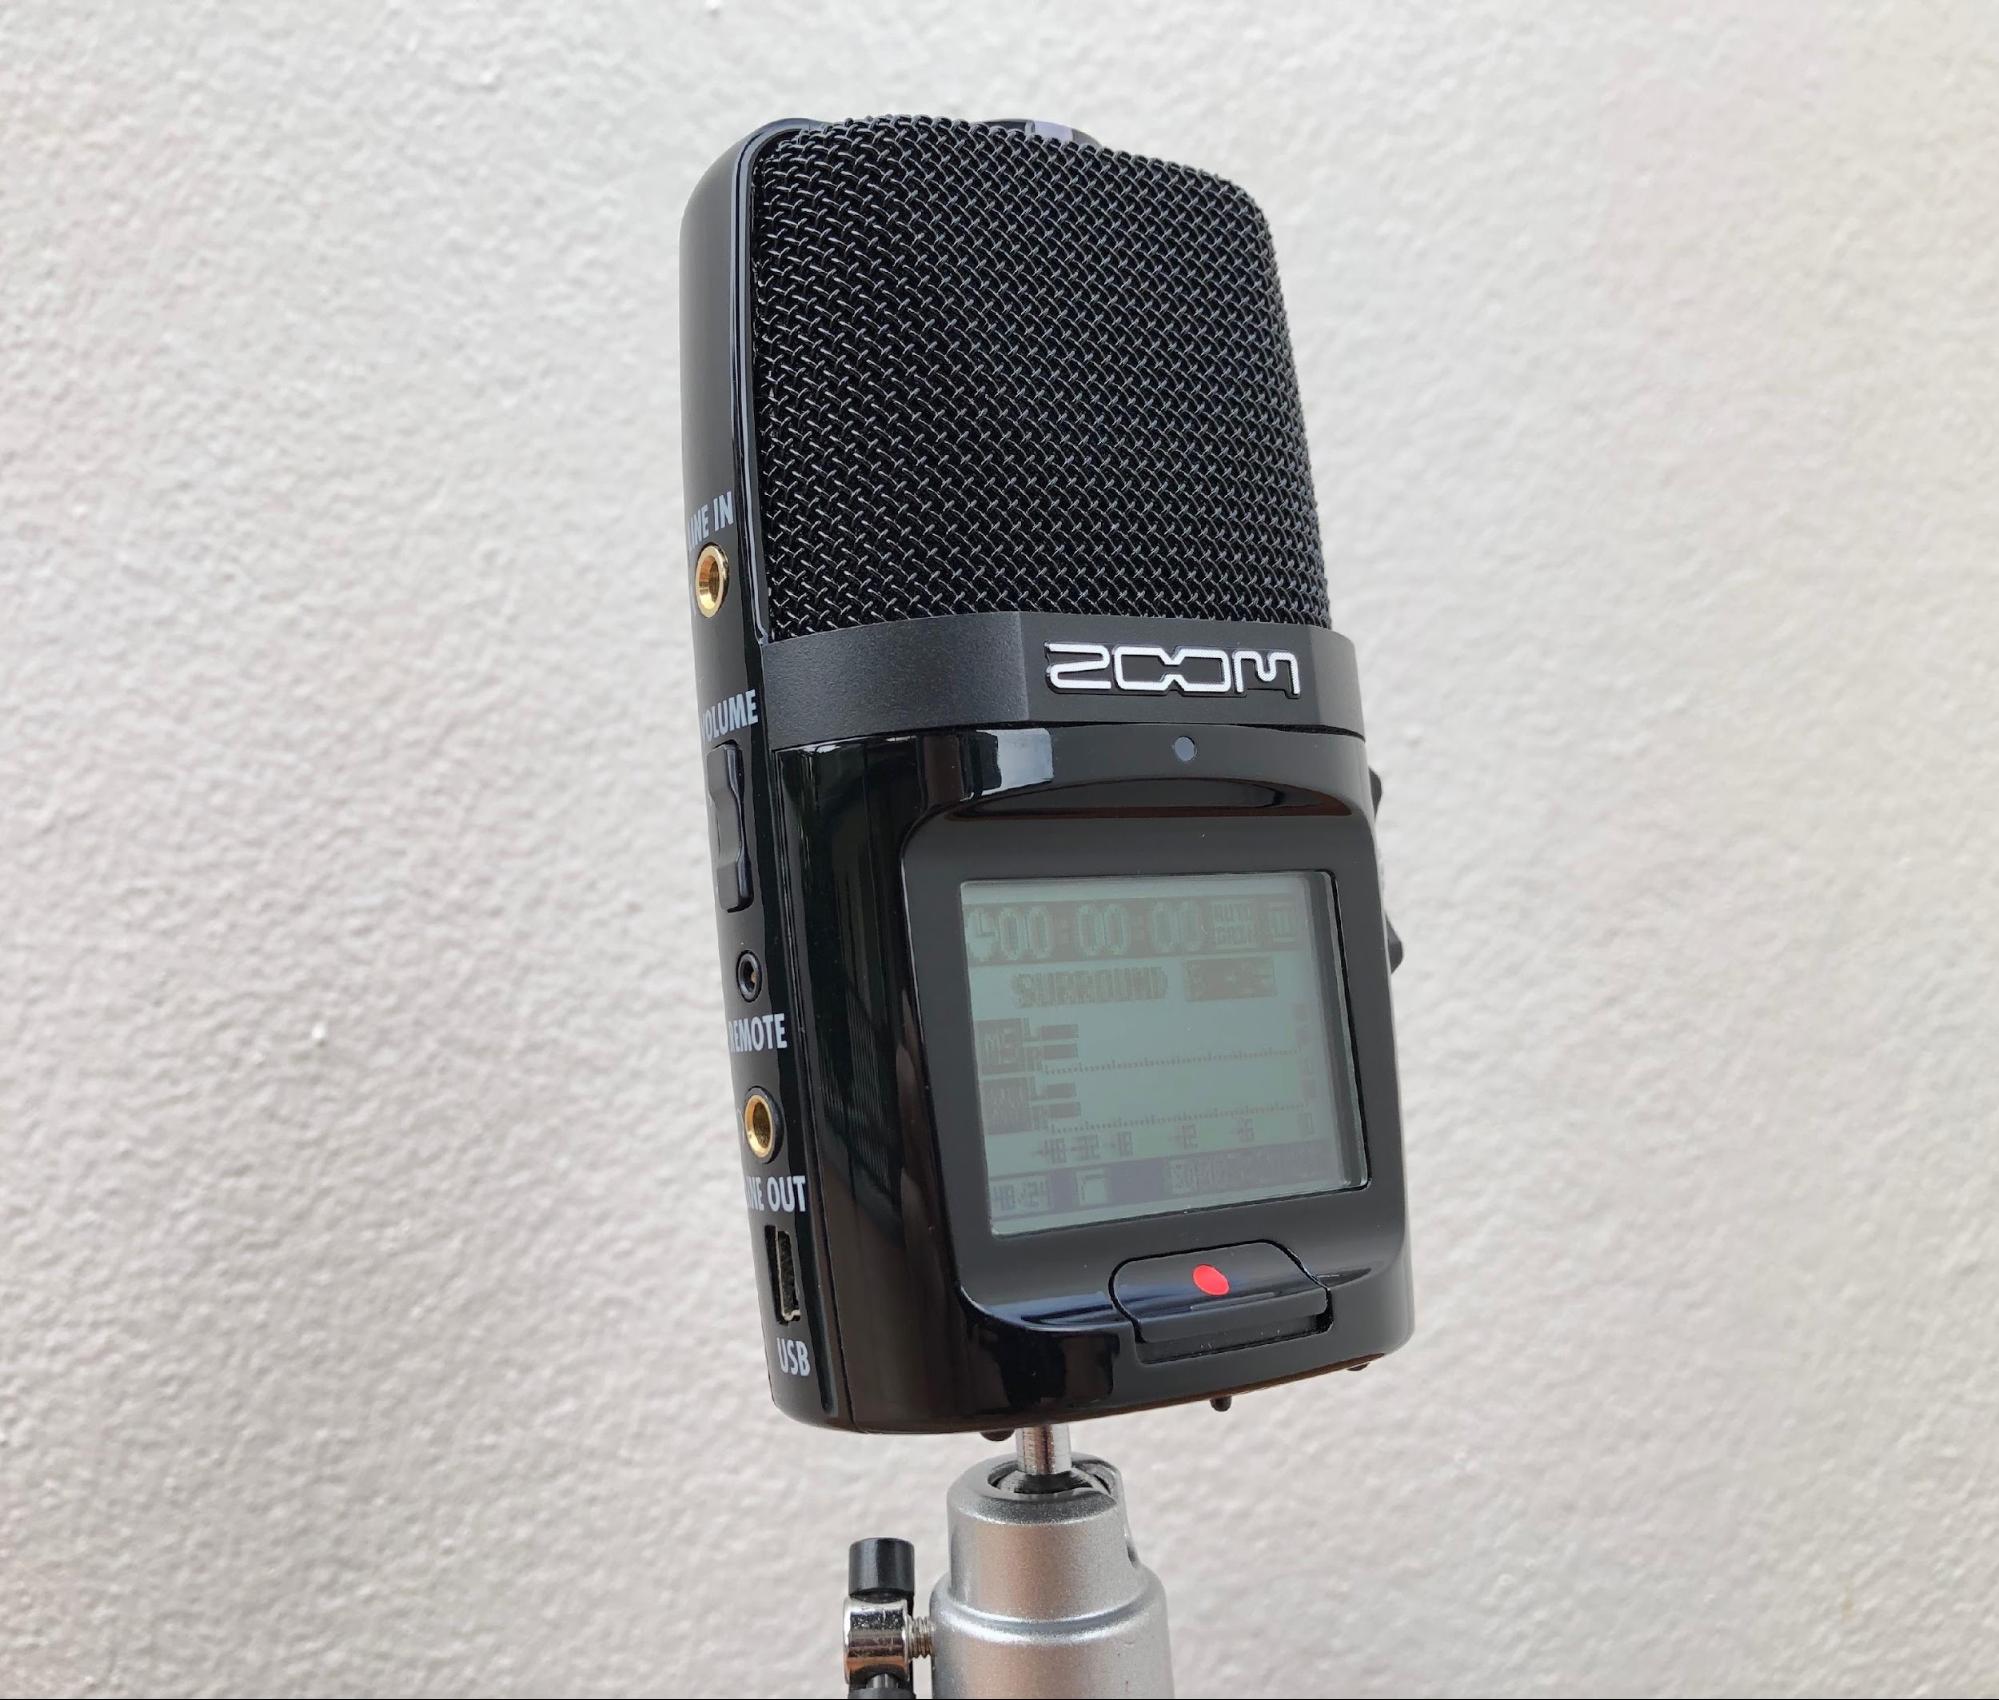 Zoom H2n Field Recorder Review (Honest Review)